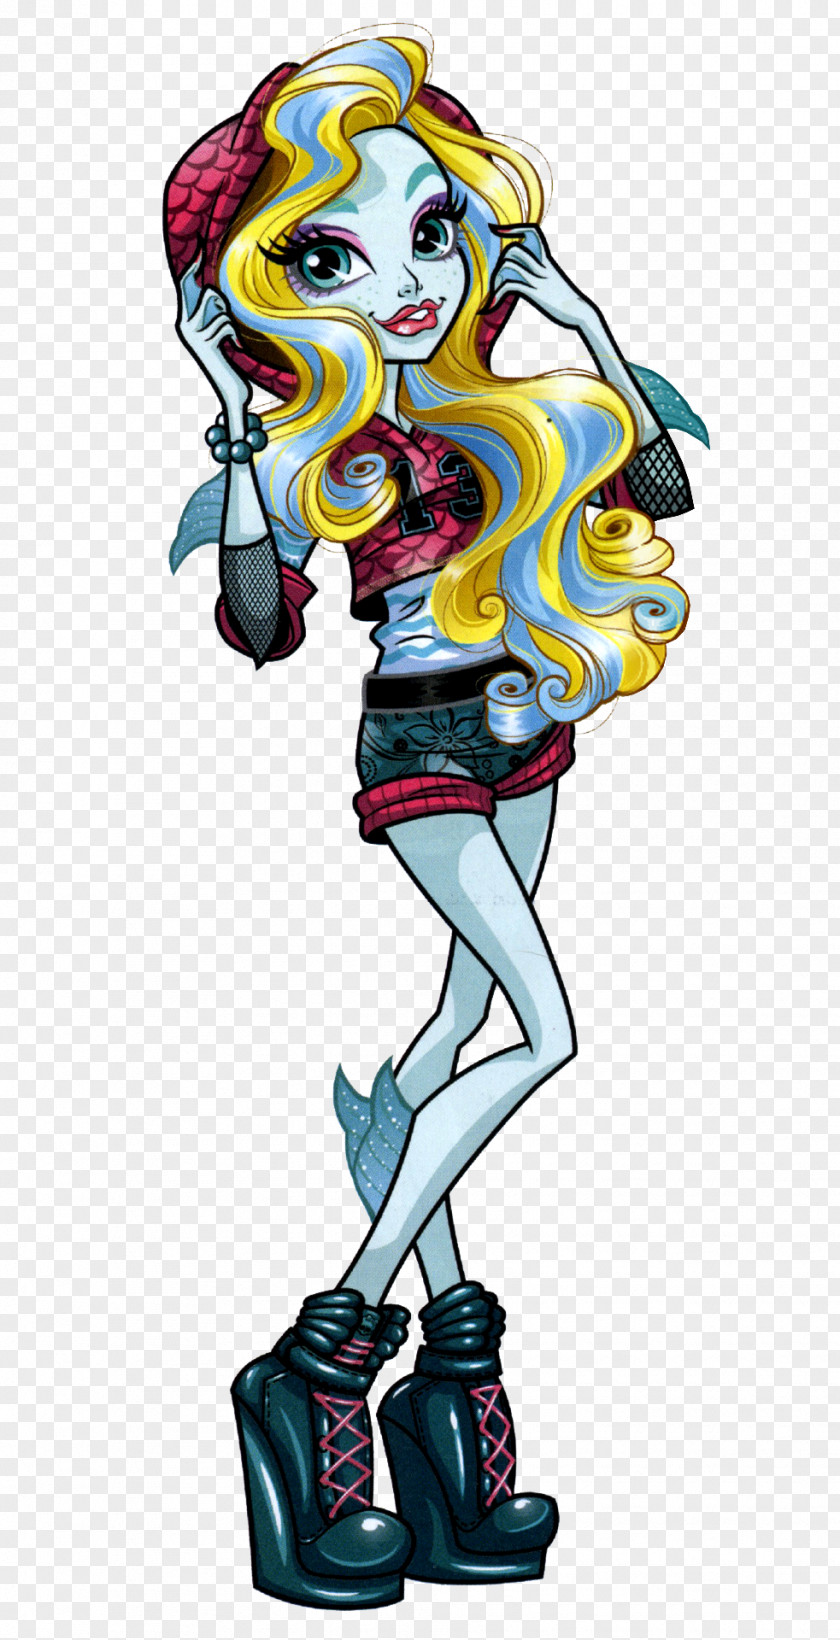 MONSTER HIGH Lagoona Blue Monster High Cleo DeNile Frankie Stein Clawdeen Wolf PNG